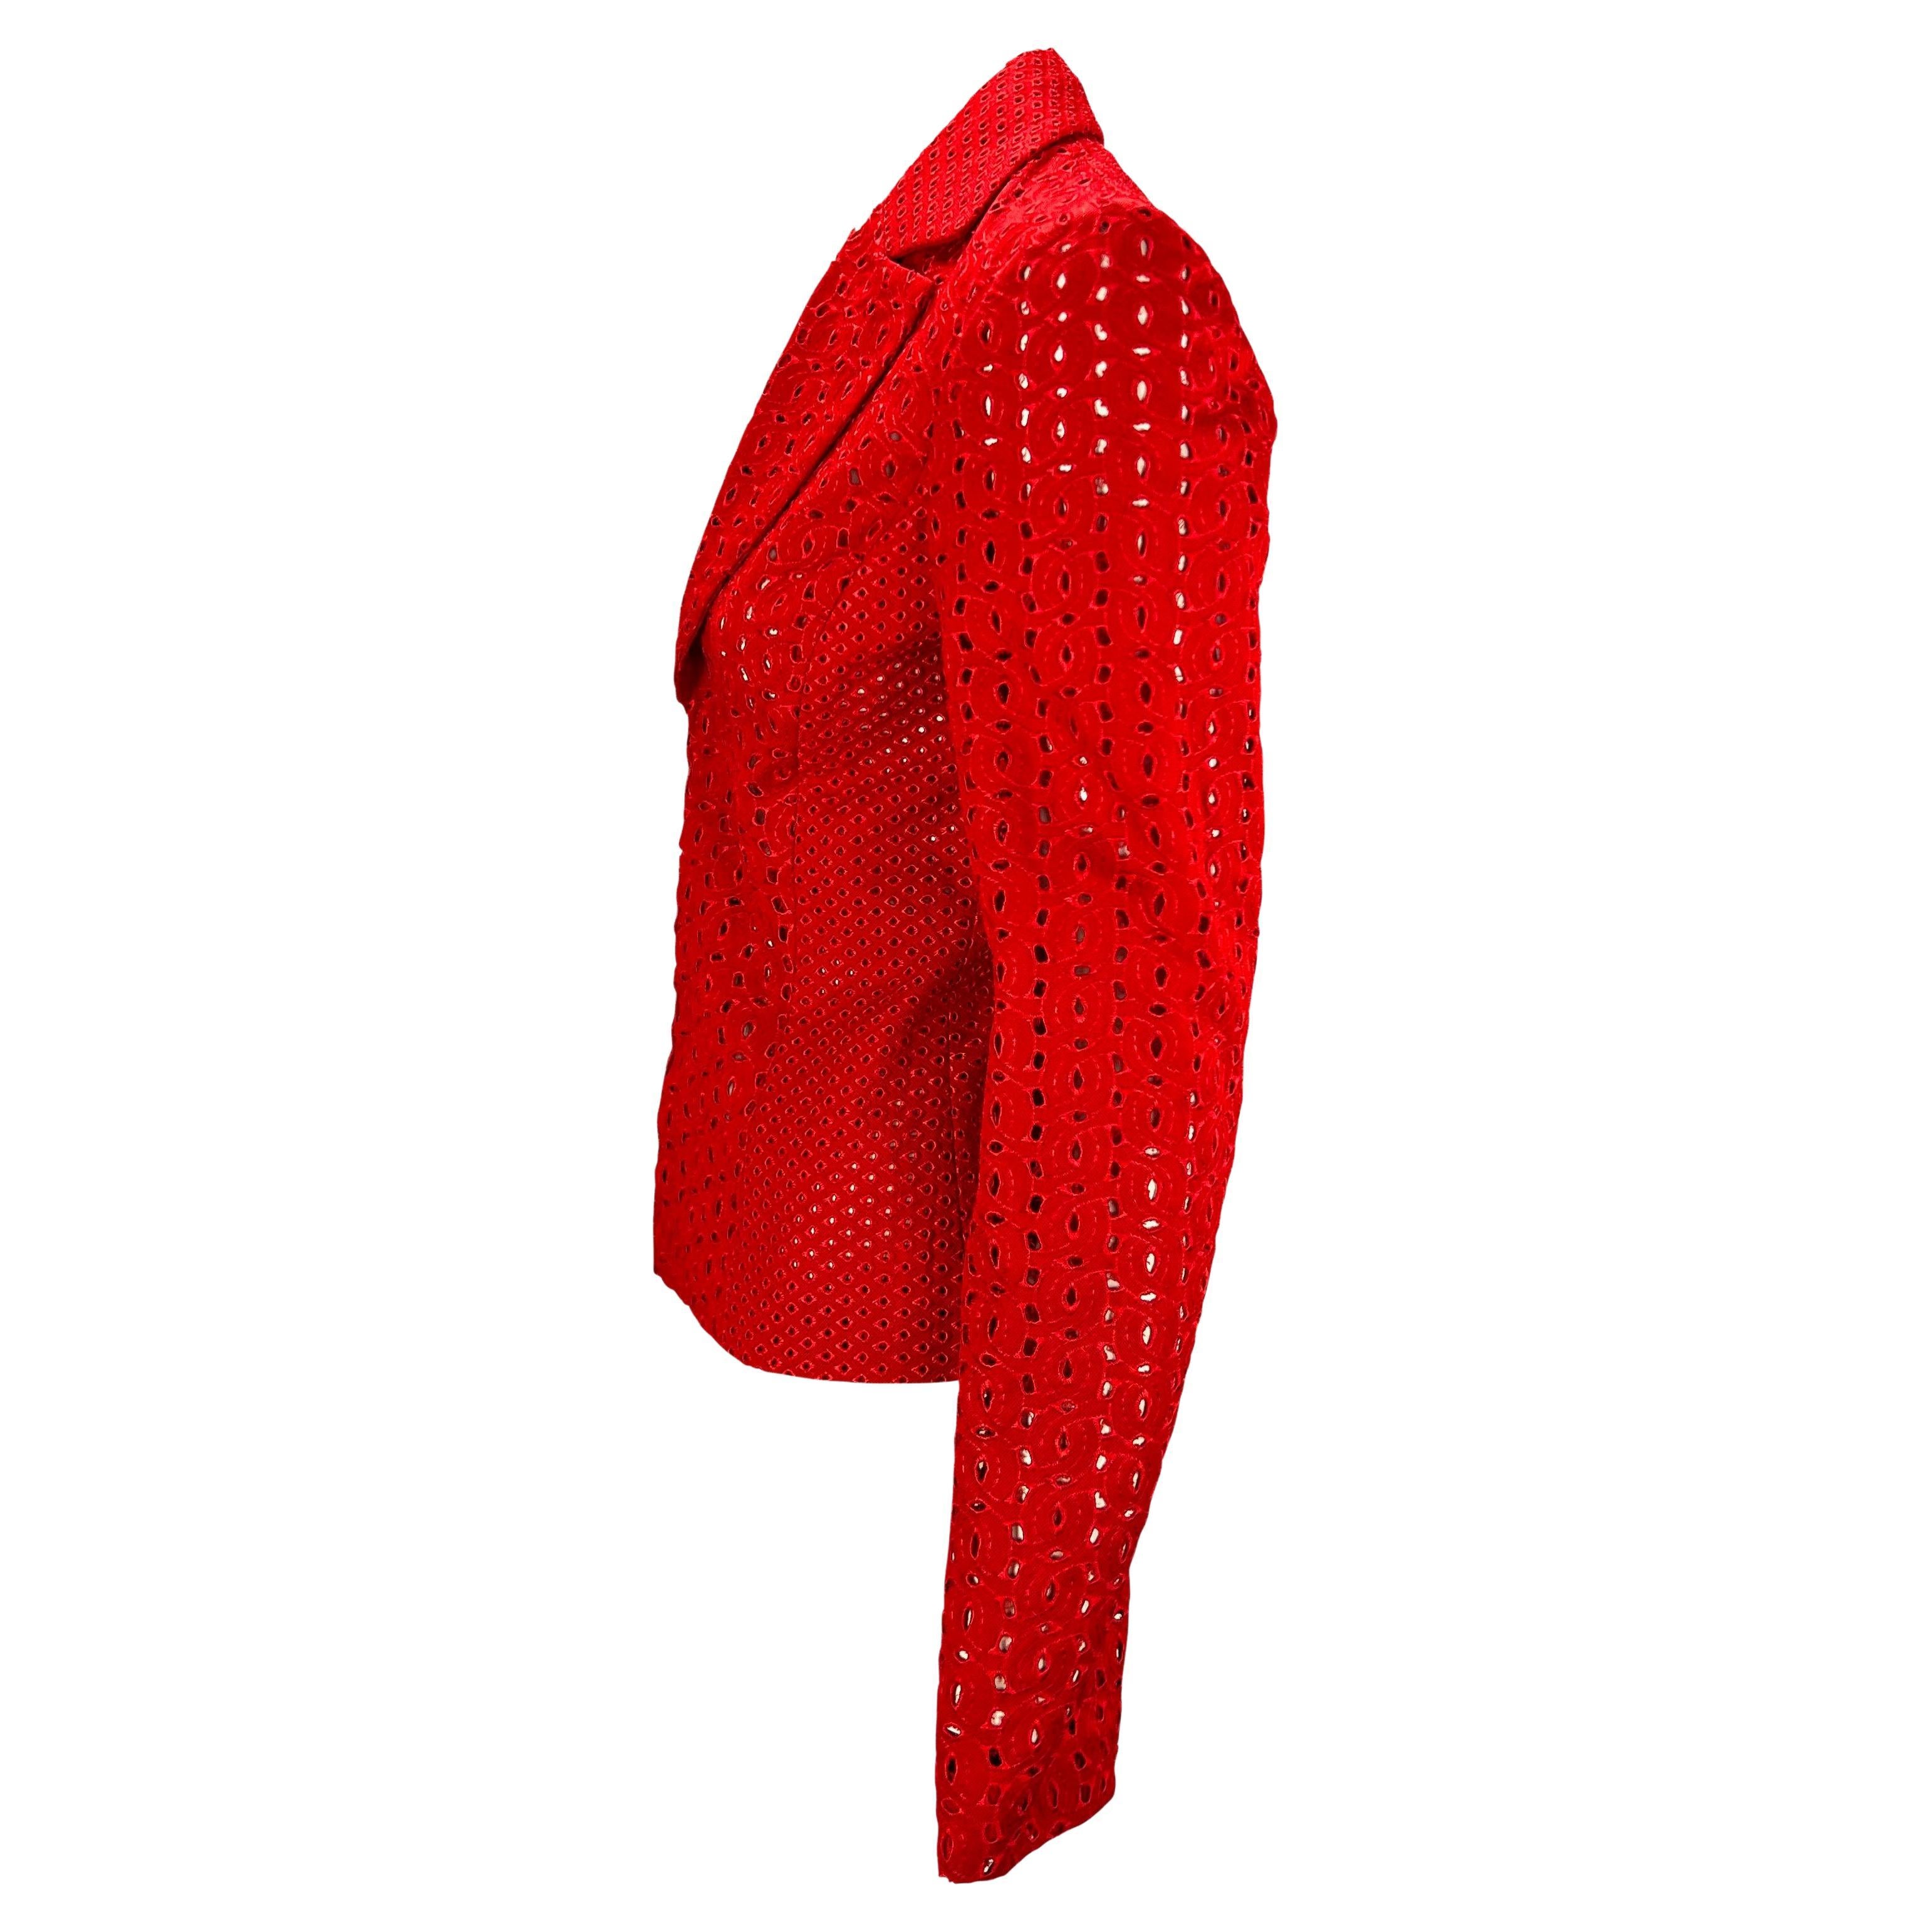 S/S 2002 Gianni Versace by Donatella Eyelet Cutout Red Sheer Blazer For Sale 1